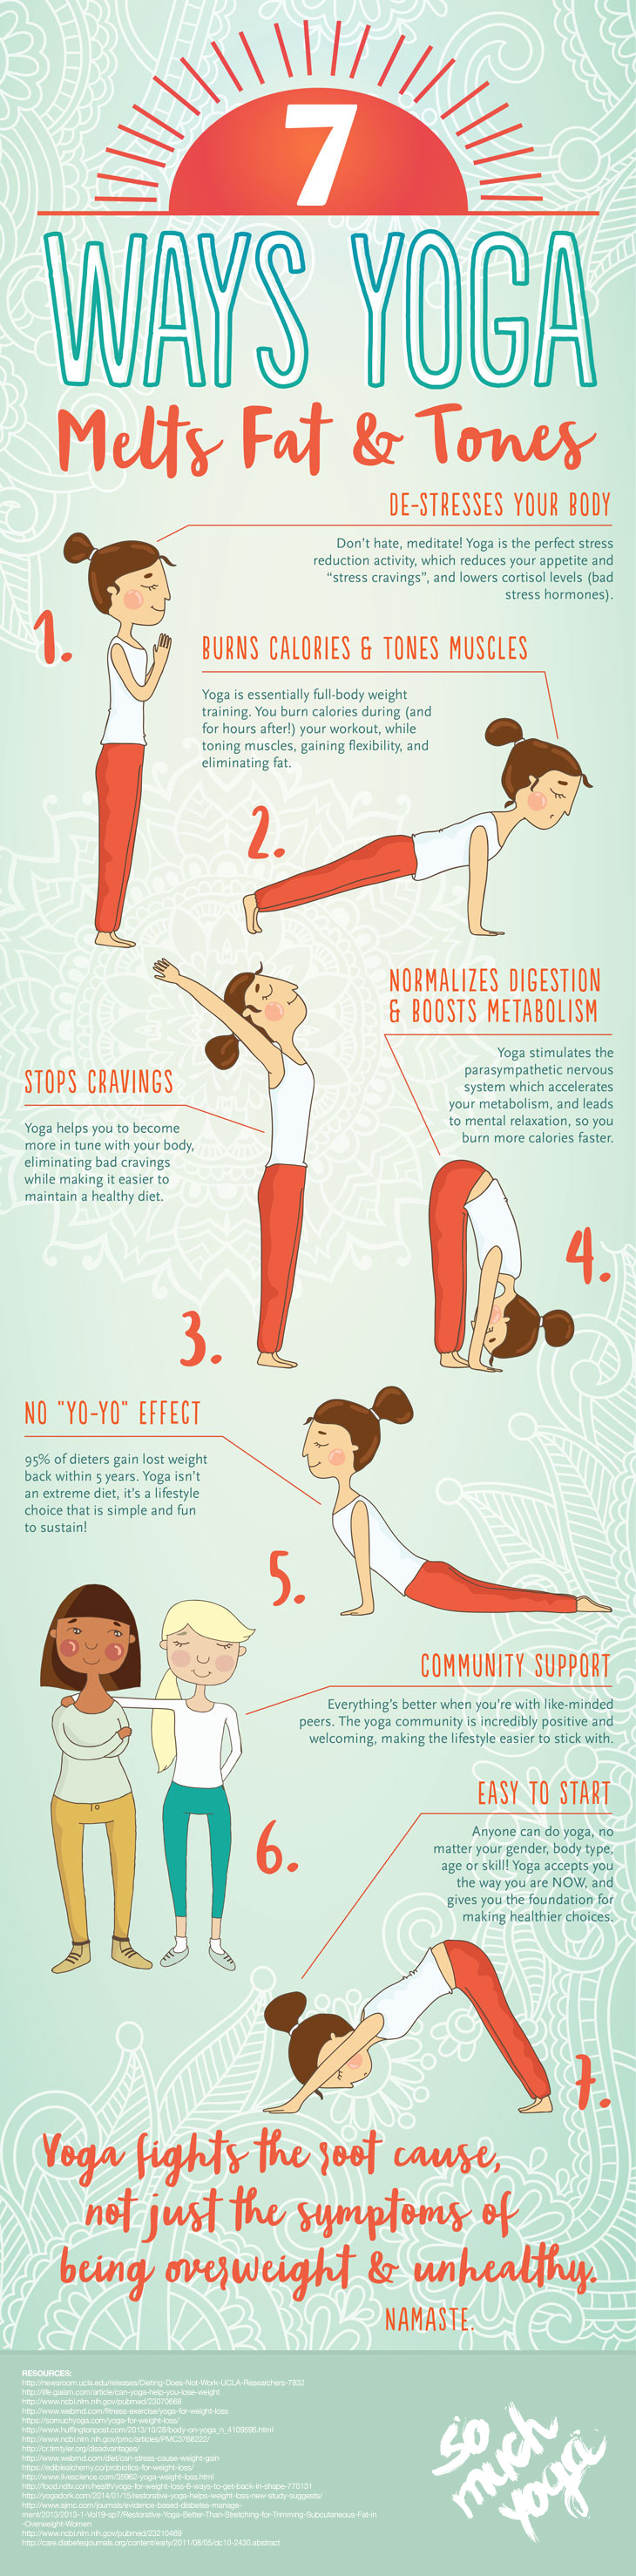 Yoga-for-weight-loss-infographic-new